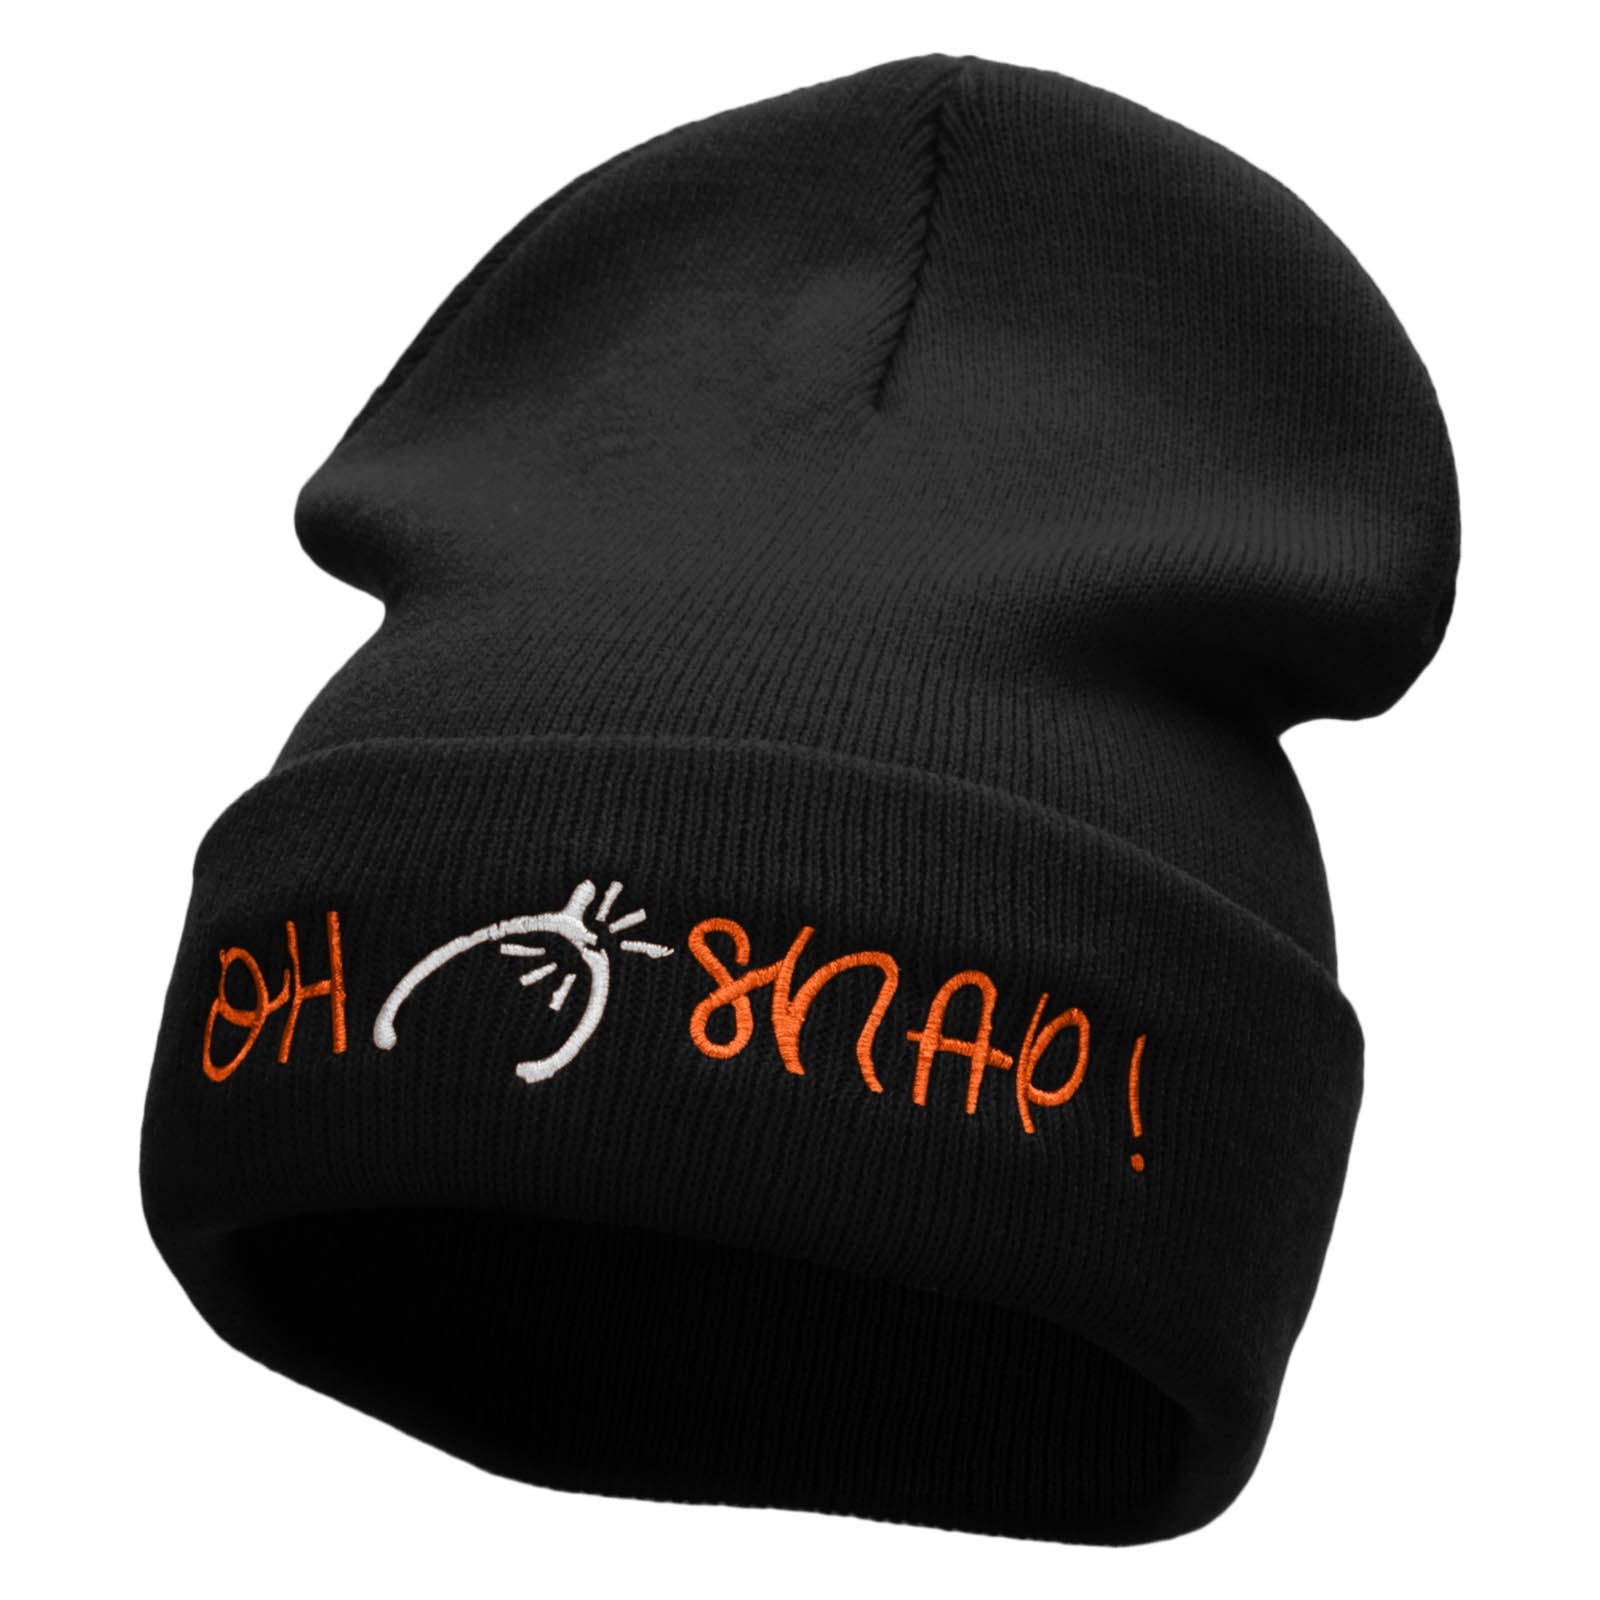 Oh Snap Embroidered 12 Inch Long Knitted Beanie - Black OSFM